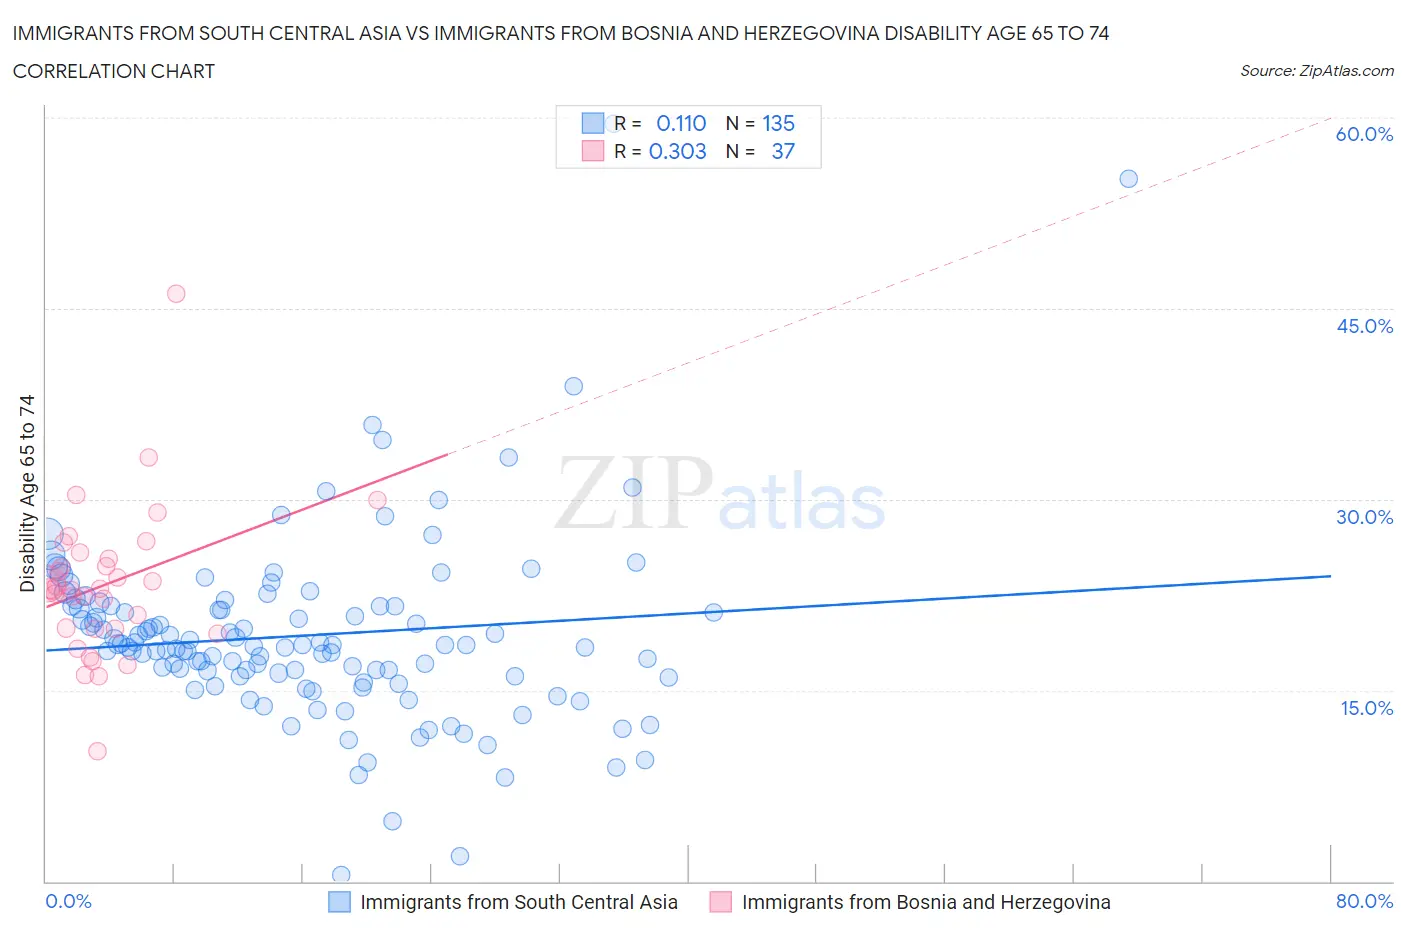 Immigrants from South Central Asia vs Immigrants from Bosnia and Herzegovina Disability Age 65 to 74